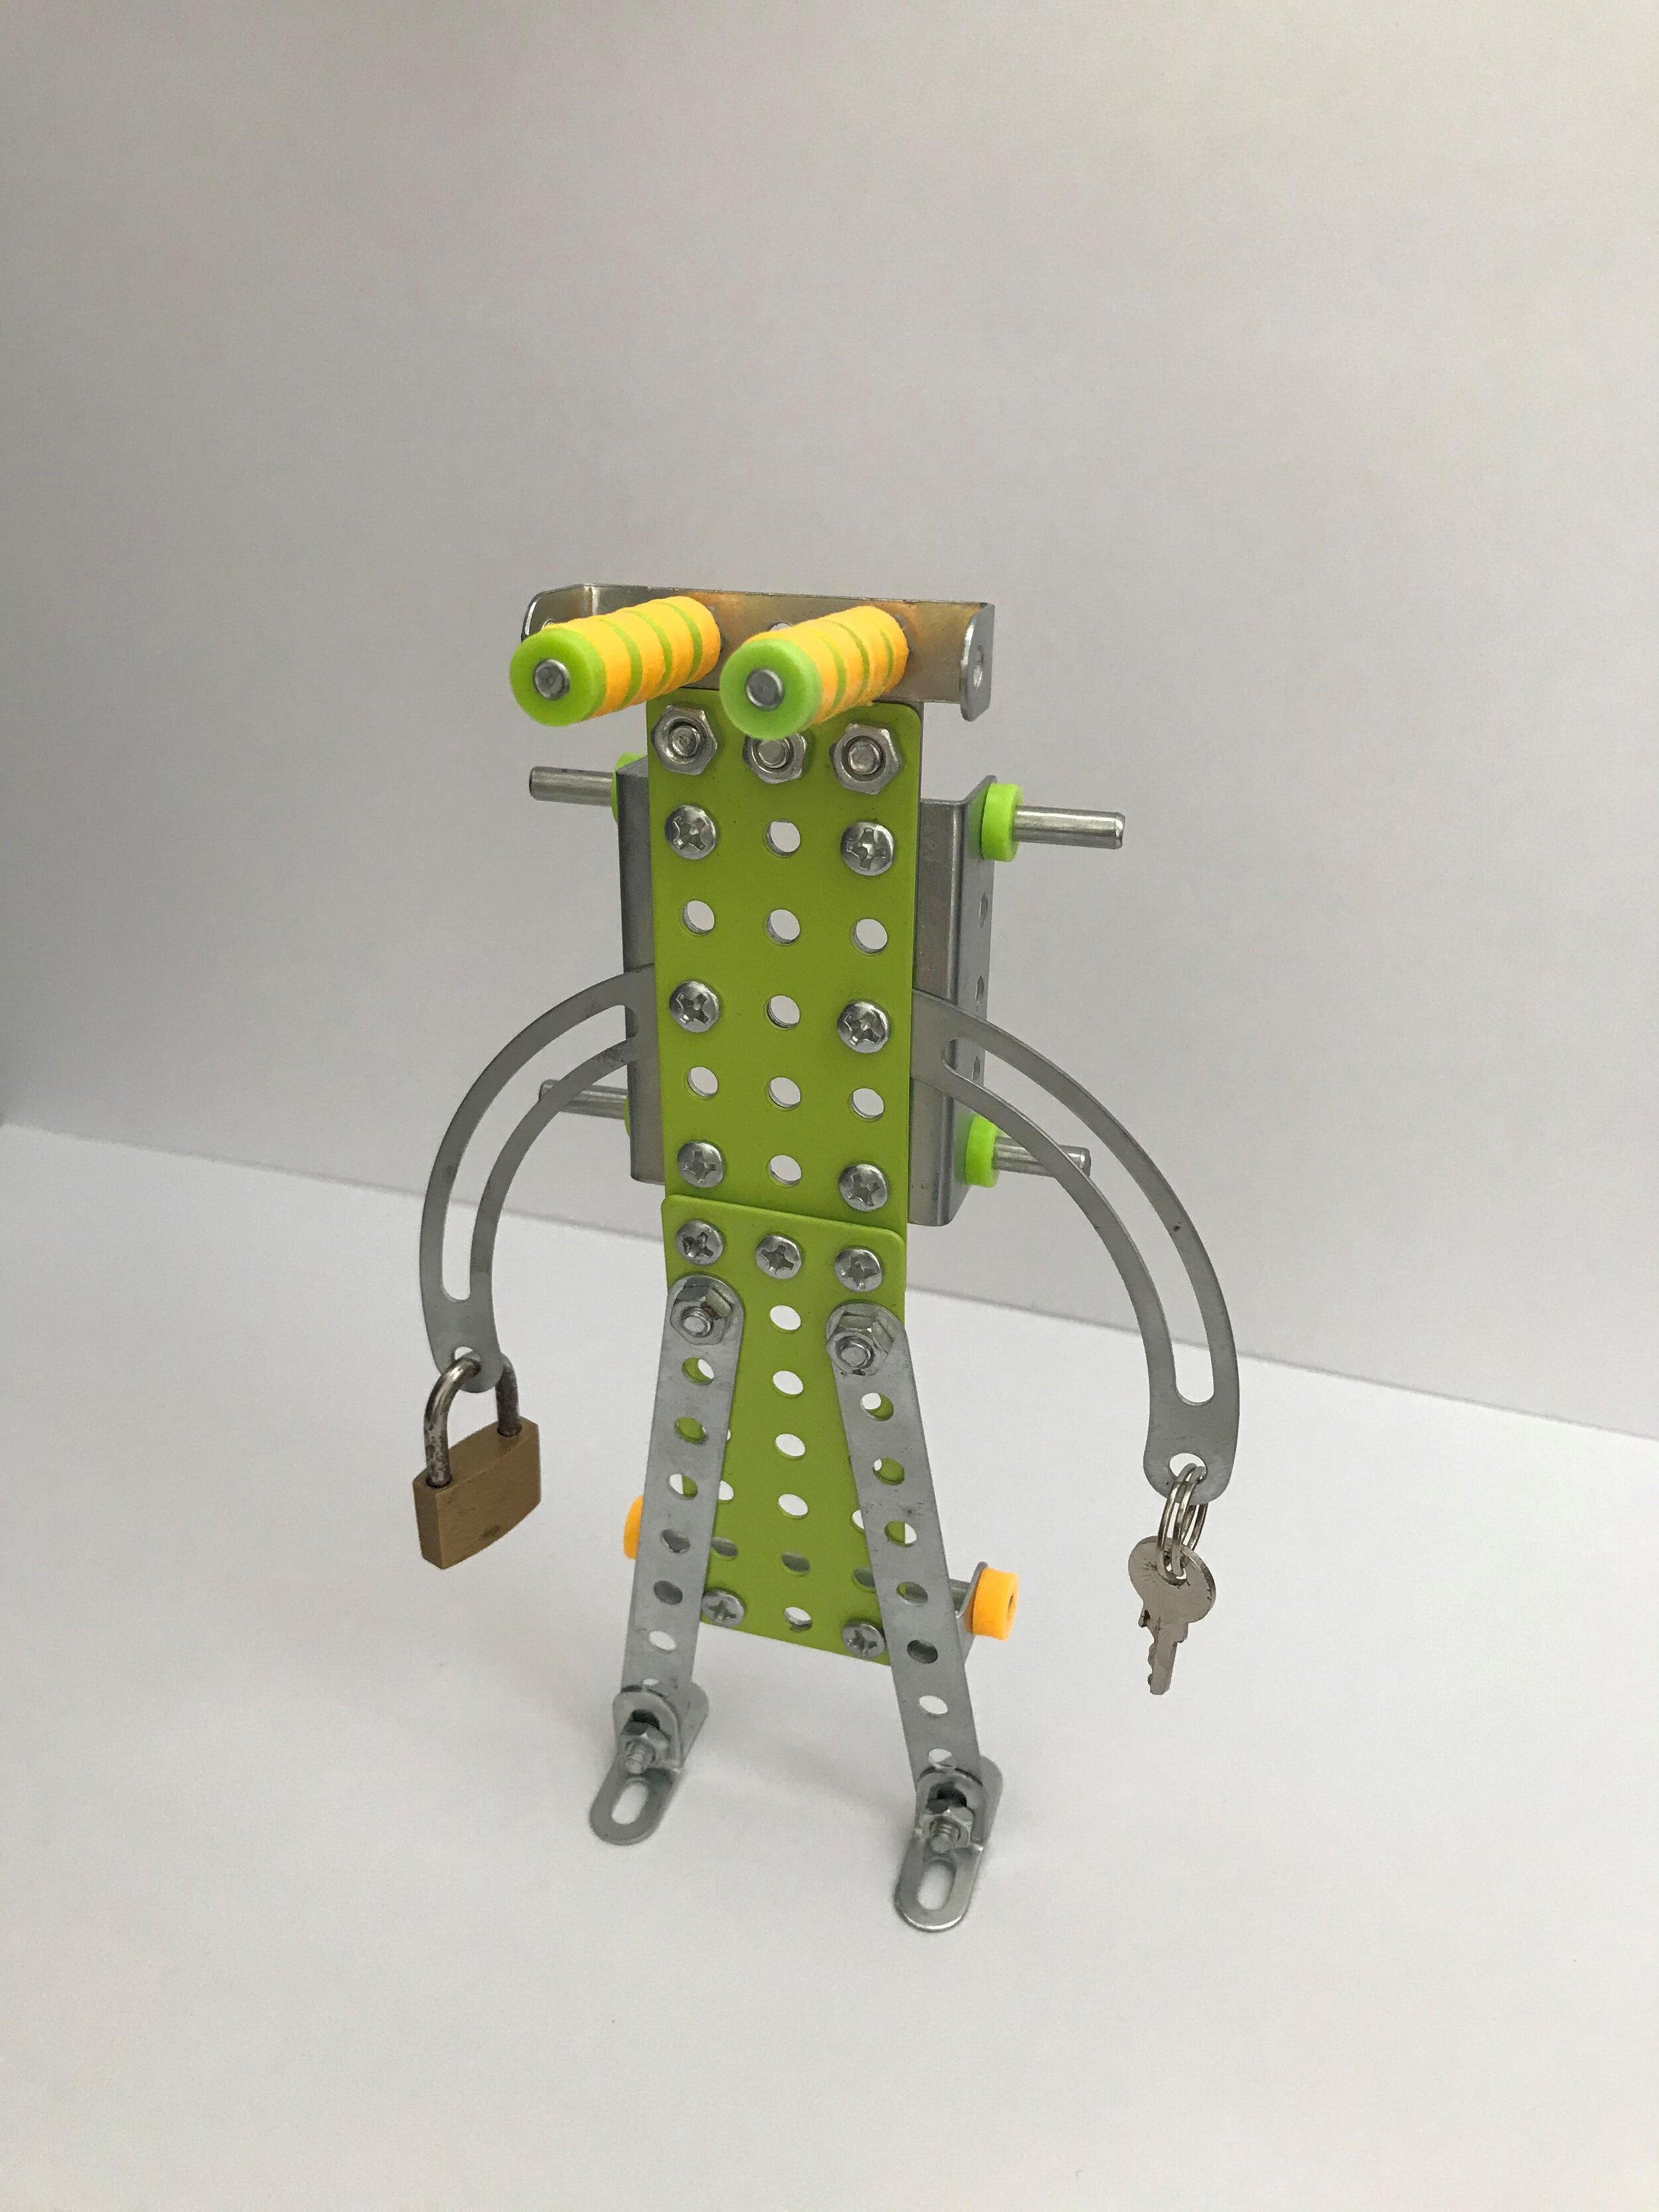 Locked-up Robot by Dylan Duncan age 6